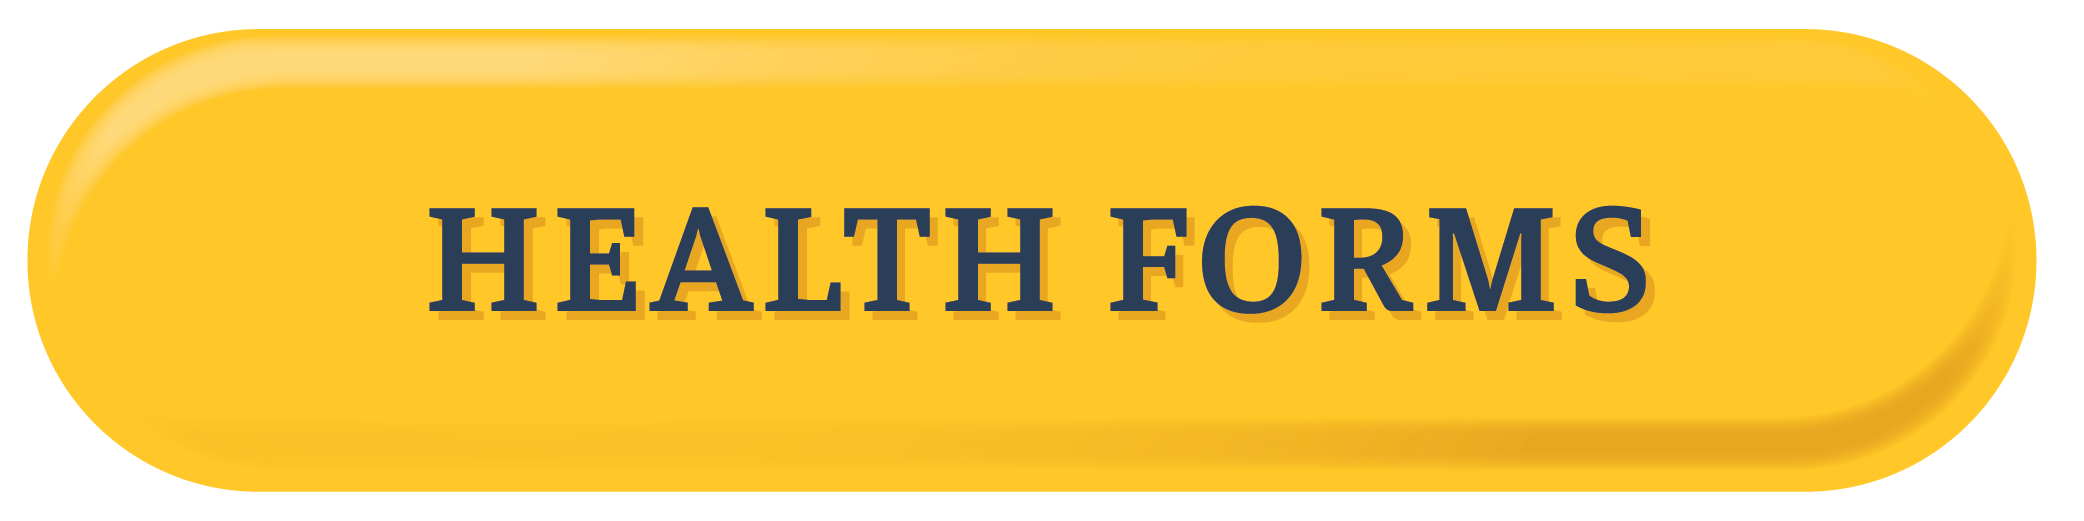 HEALTH_FORMS